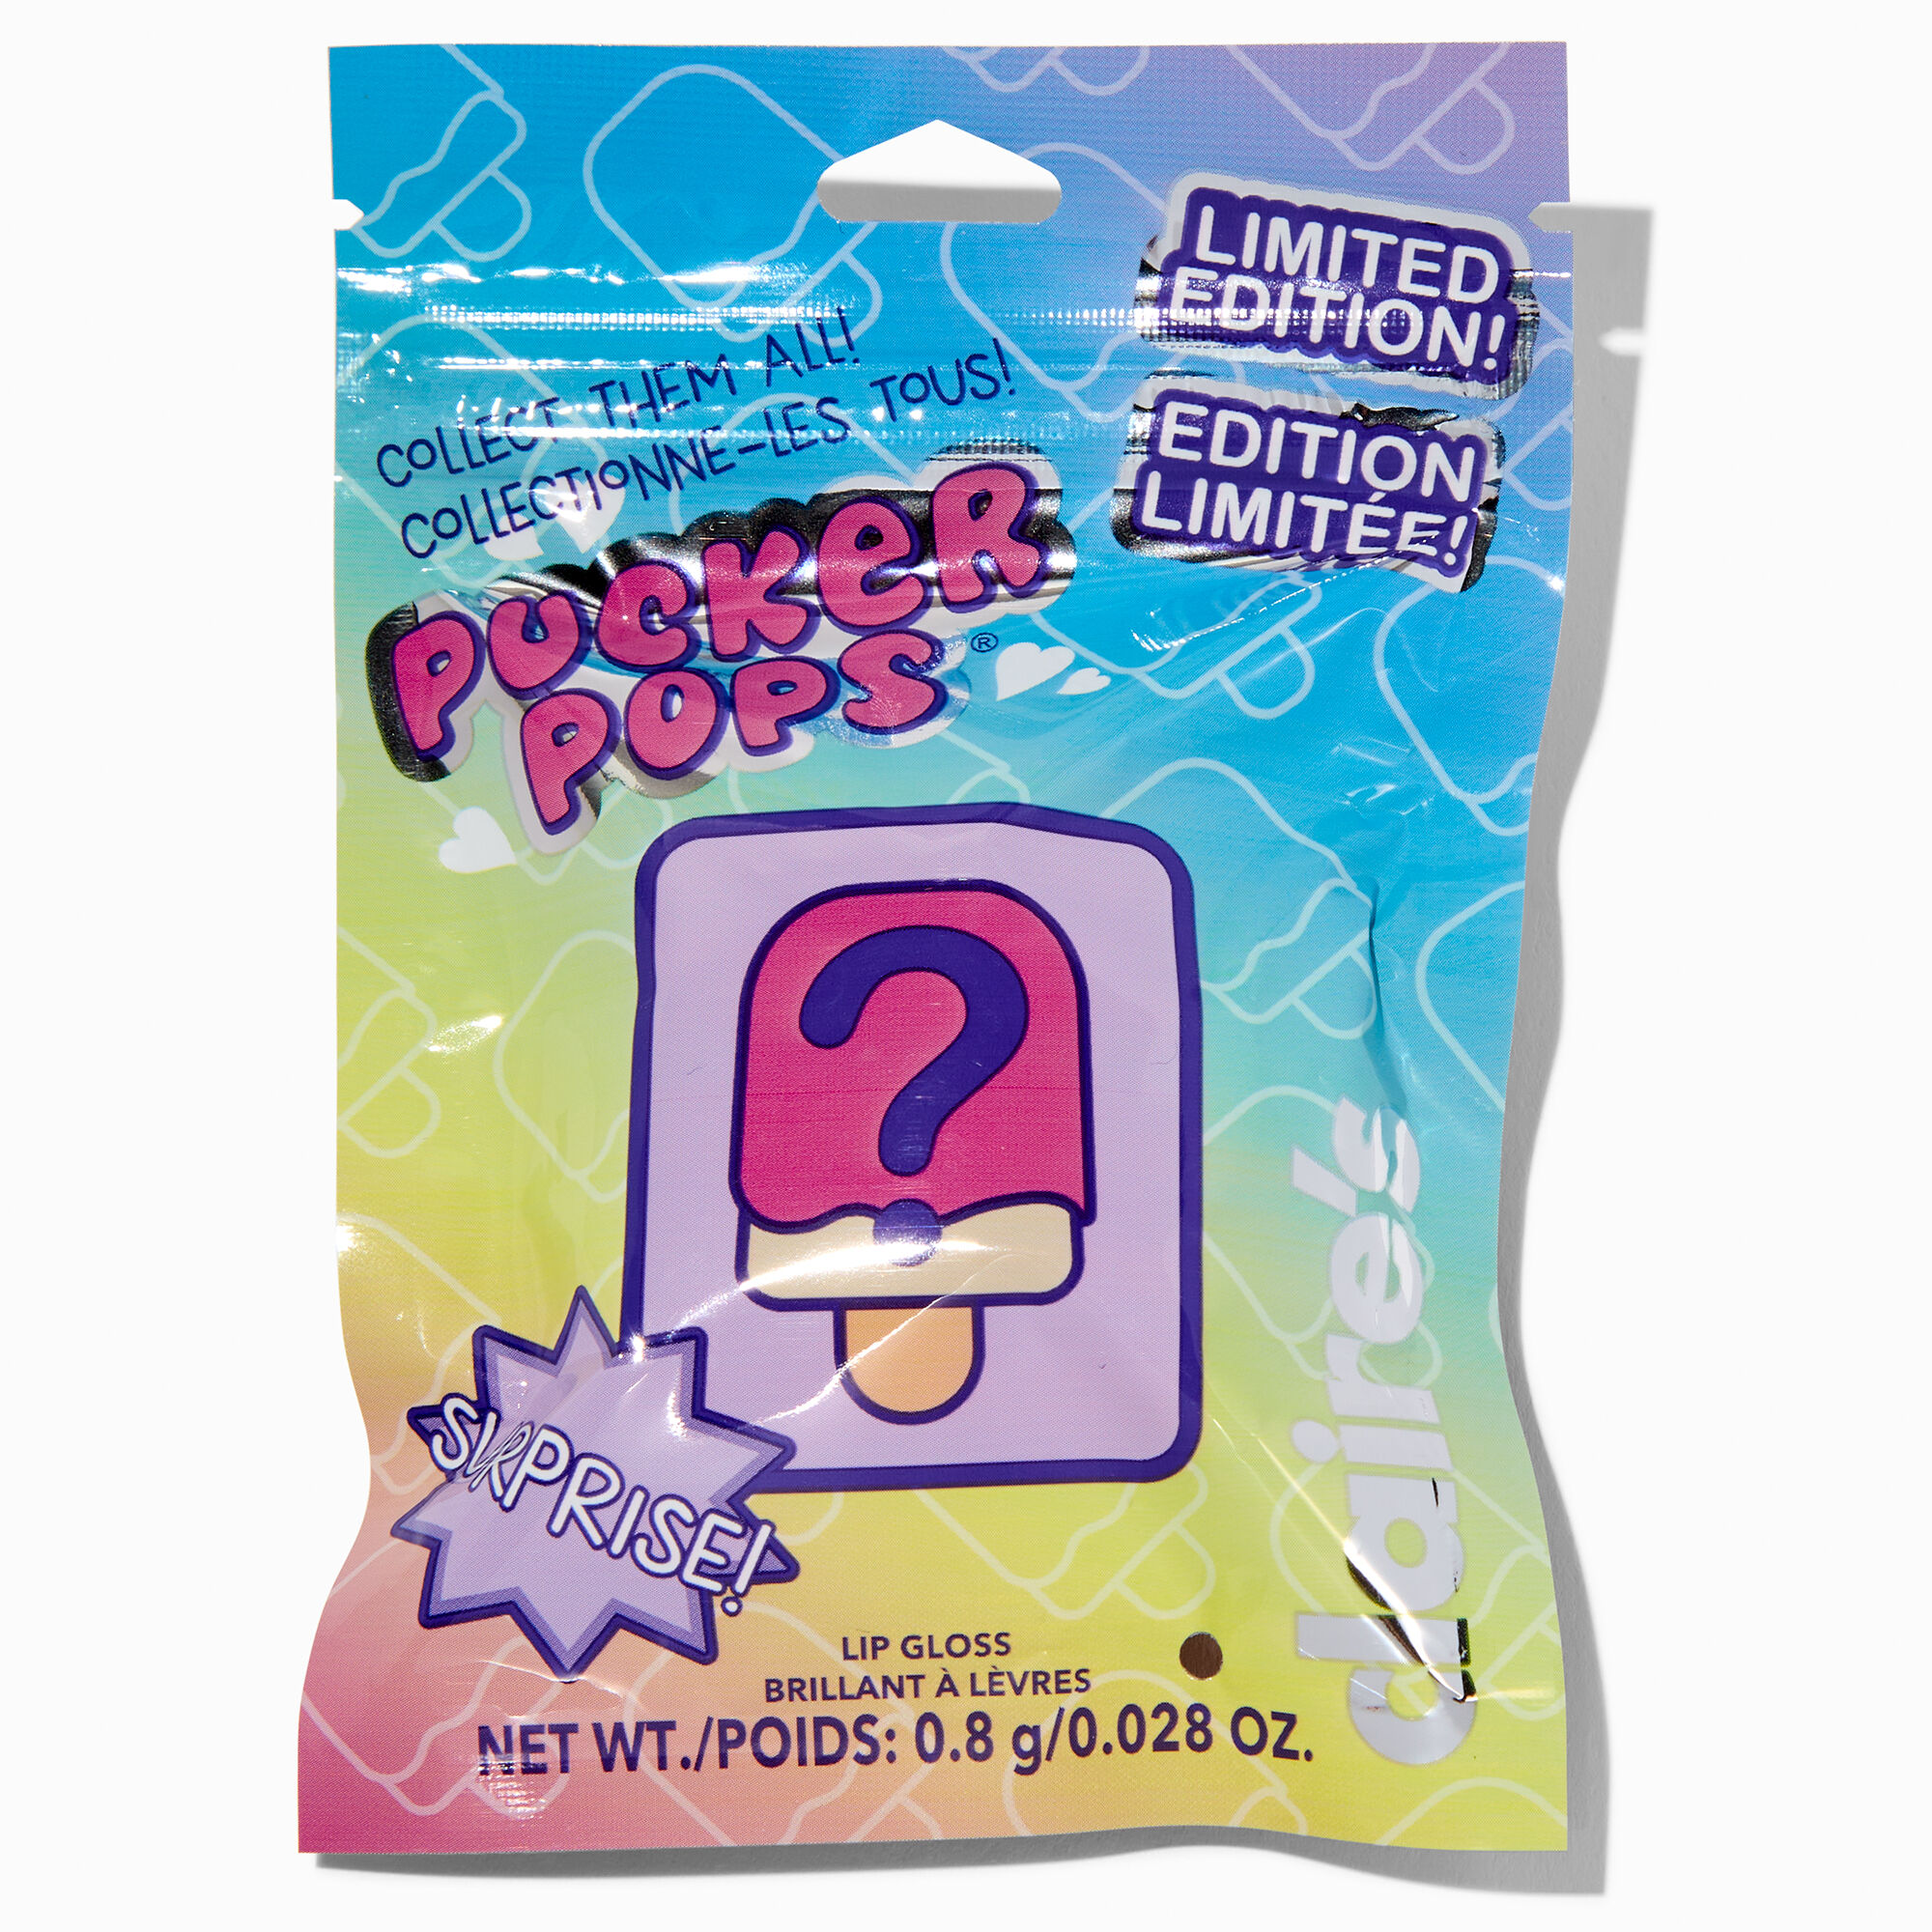 View Claires Pucker Pops Limited Edition Surprise Lip Gloss Blind Bag Styles Vary information